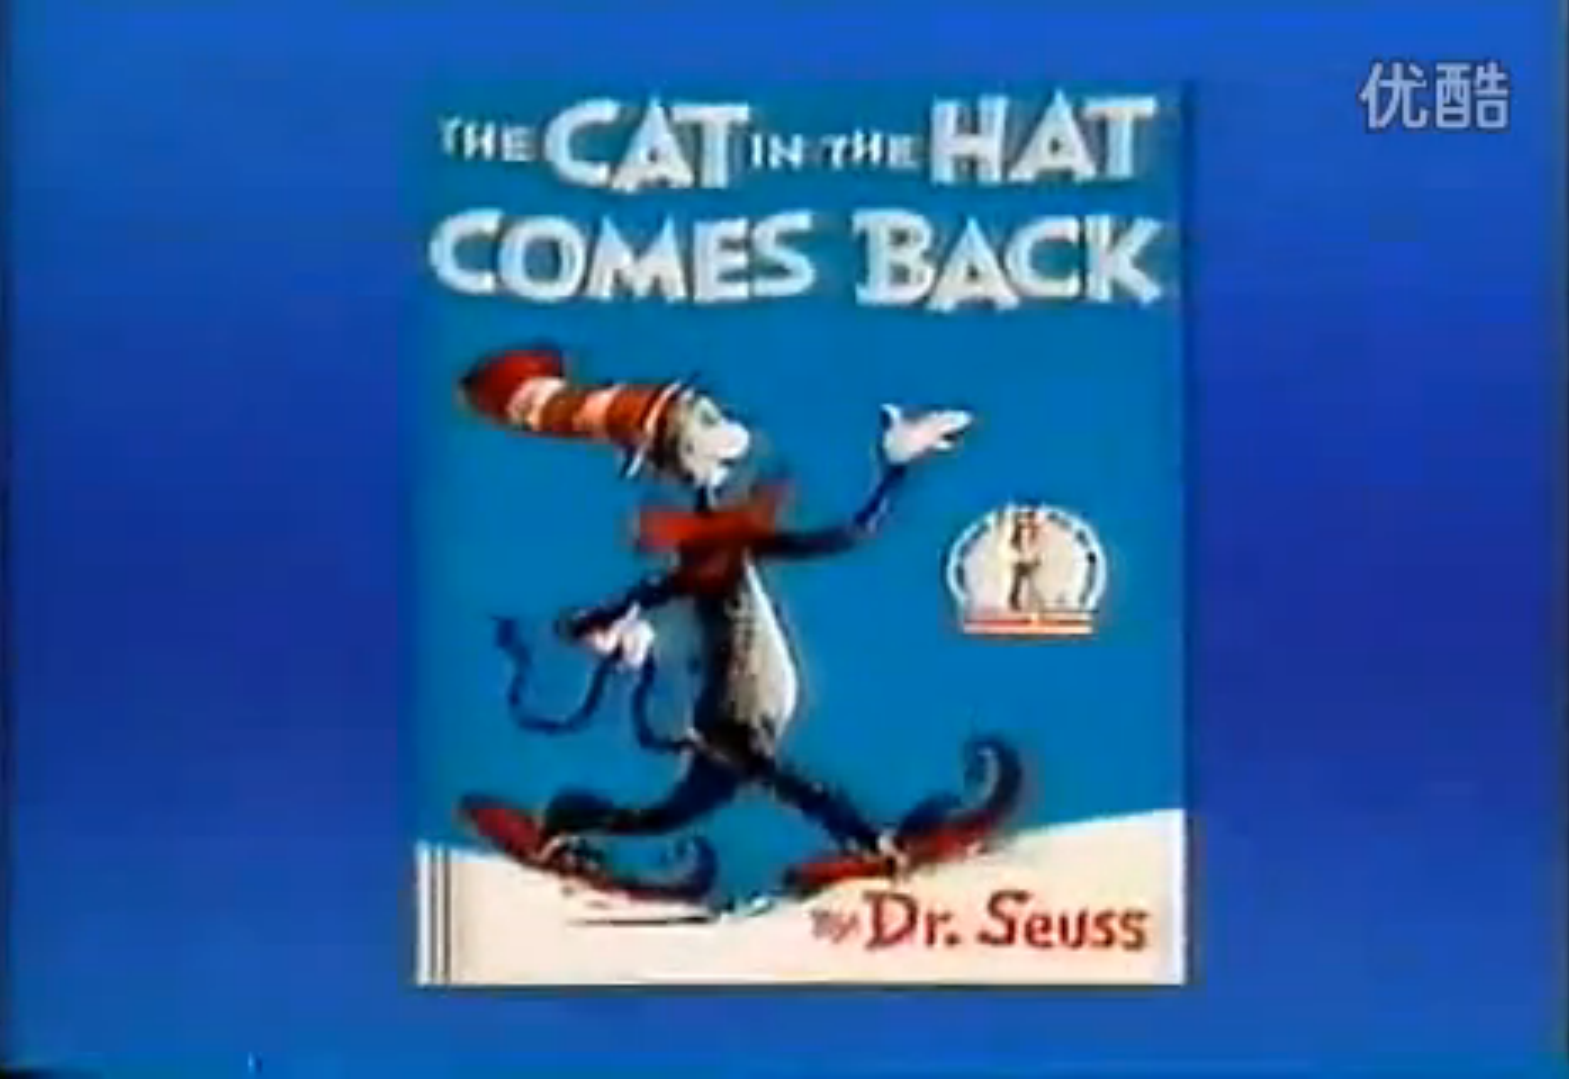 the cat in the hat comes back by dr seuss